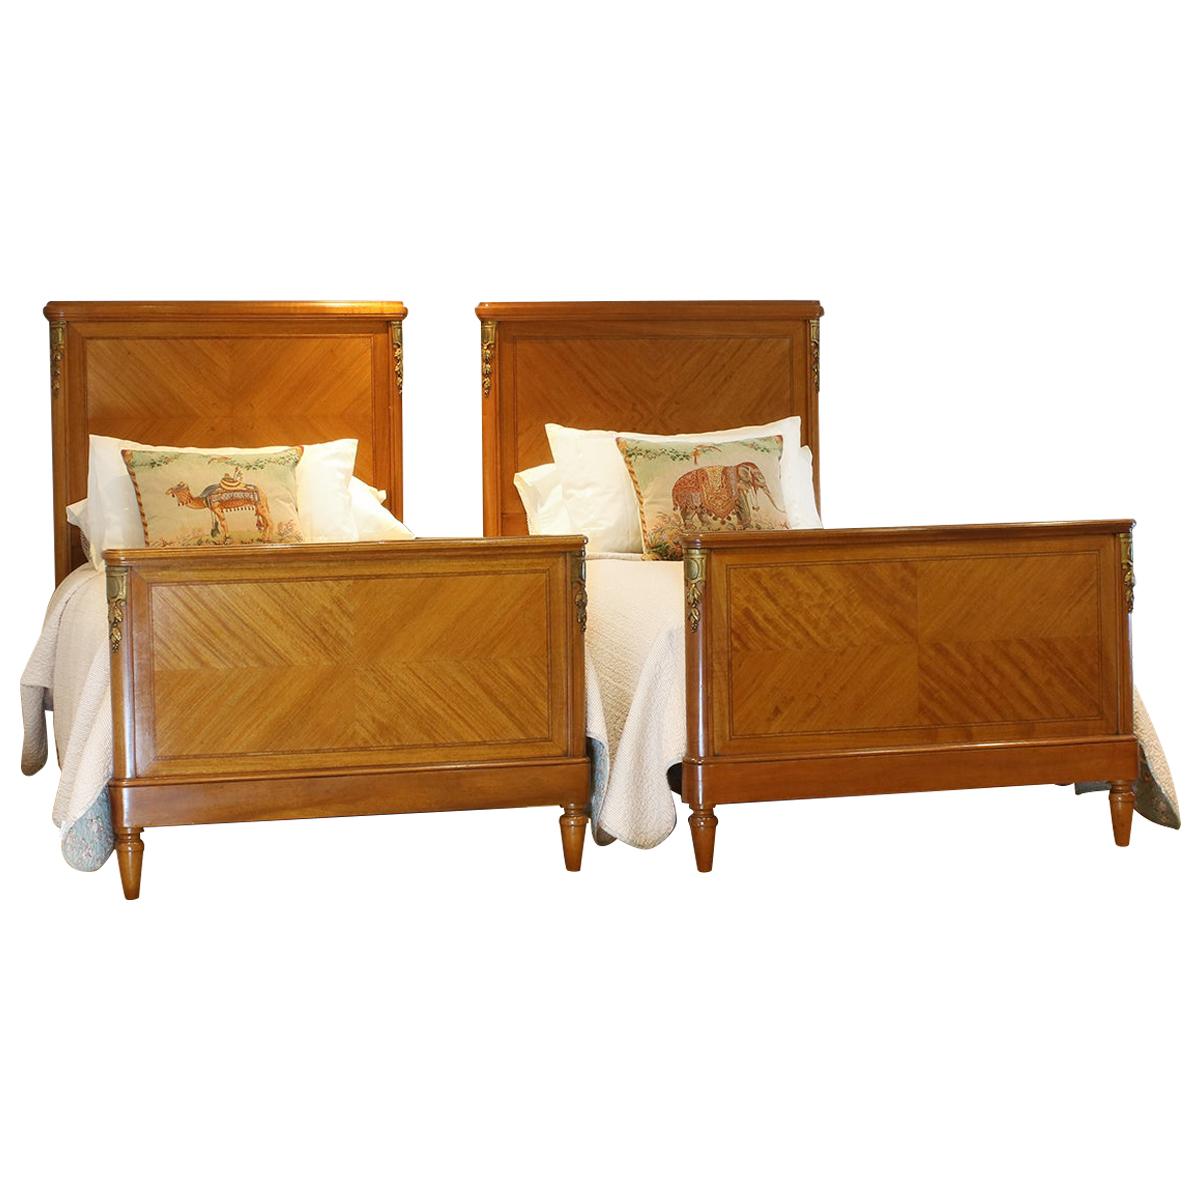 Matching Pair of French Antique Beds, WP32